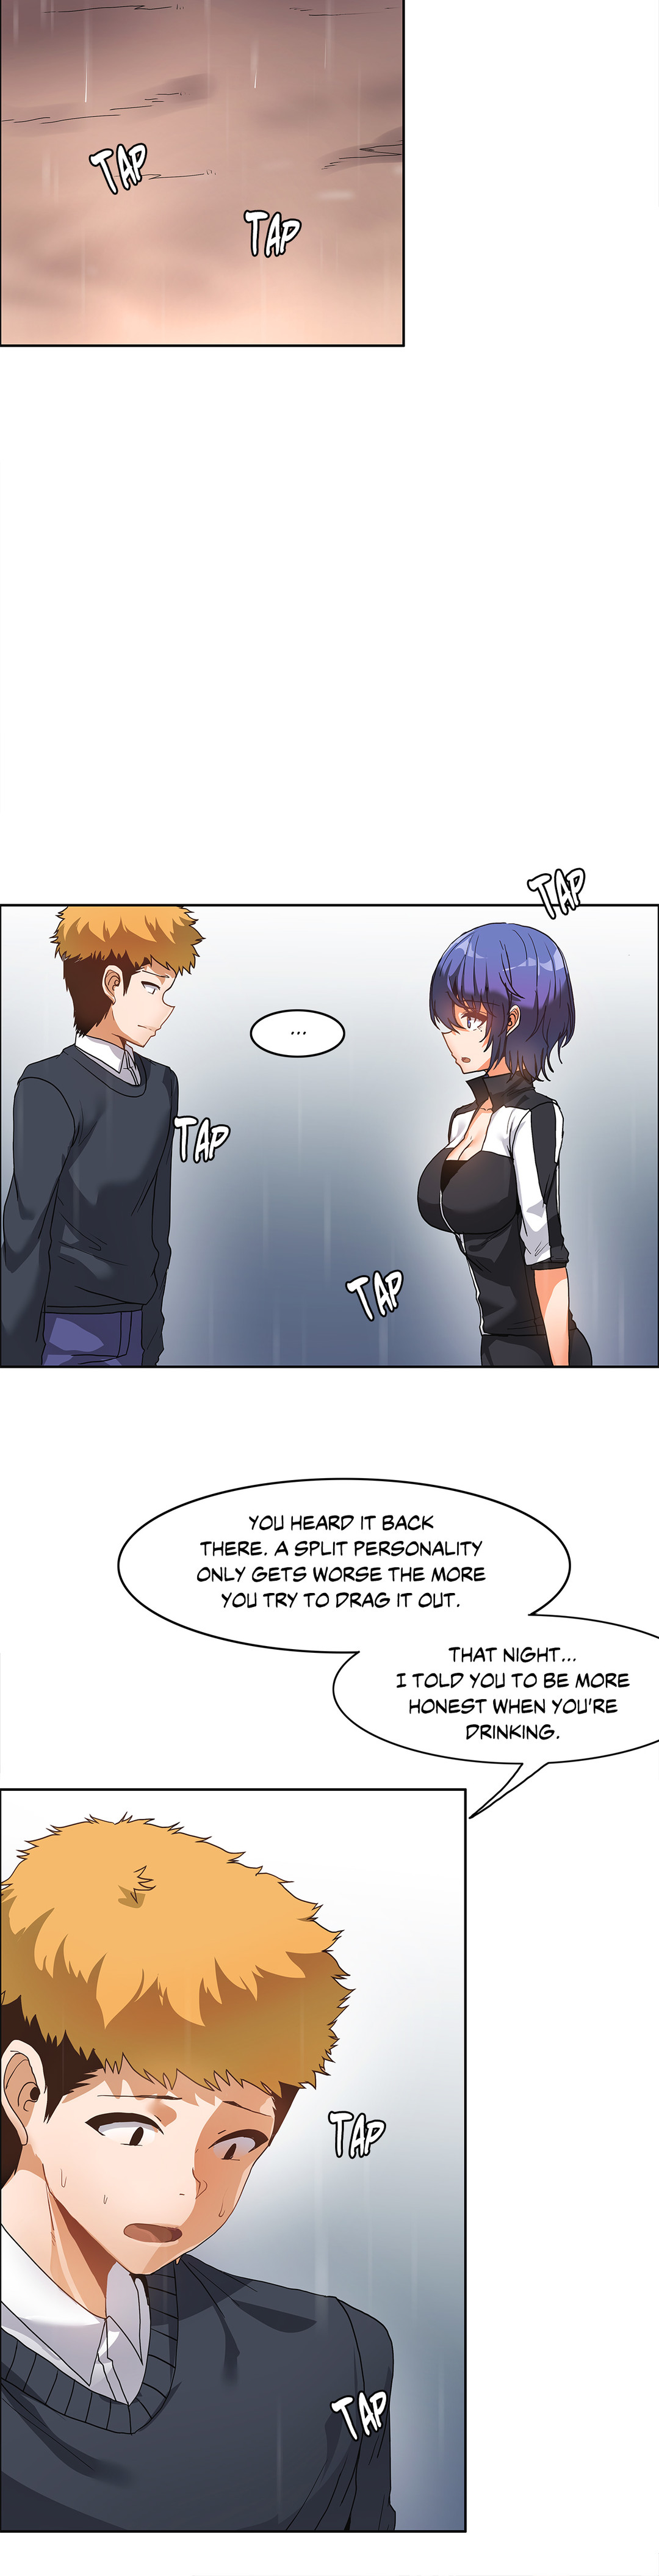 The Girl That Wet the Wall Ch 51 - 55 